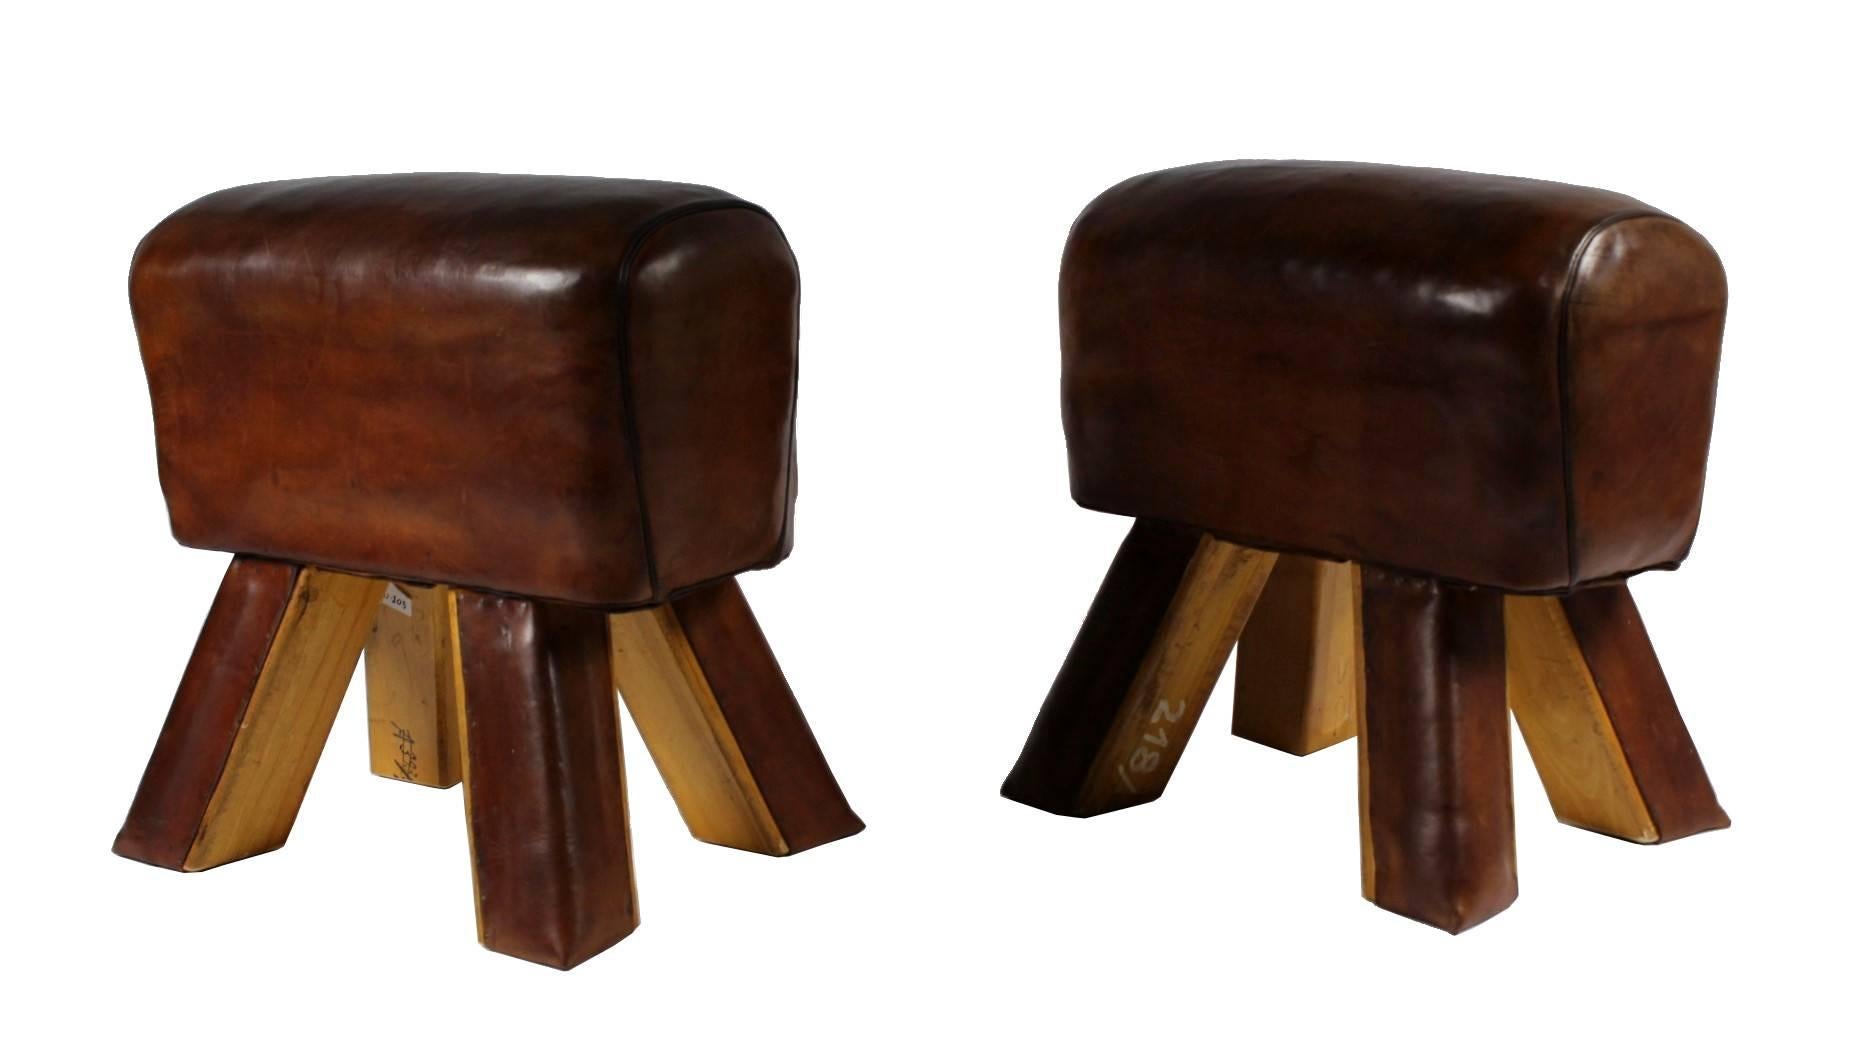 Pair of leather gym stools from the 1930s. They are in good original condition.